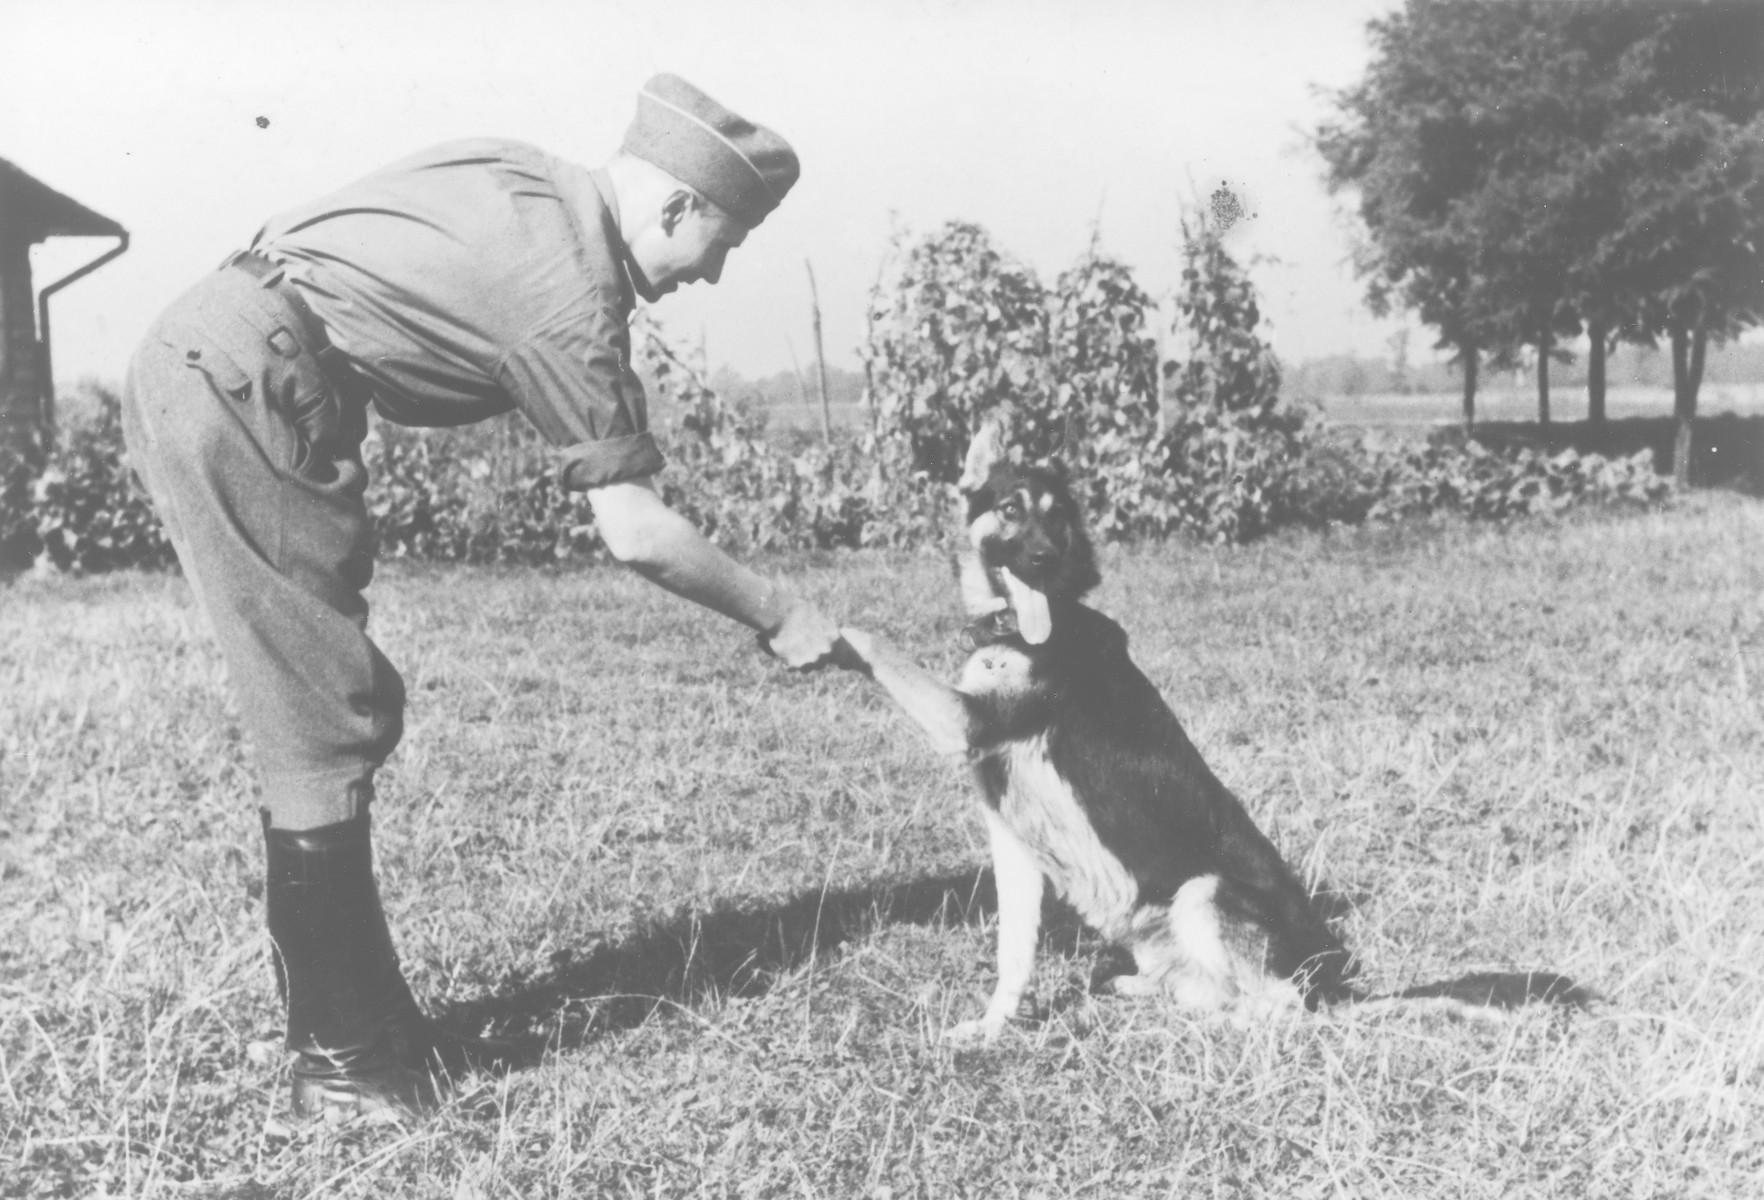 SS officer Karl Hoecker shakes hands with his dog Favorit.